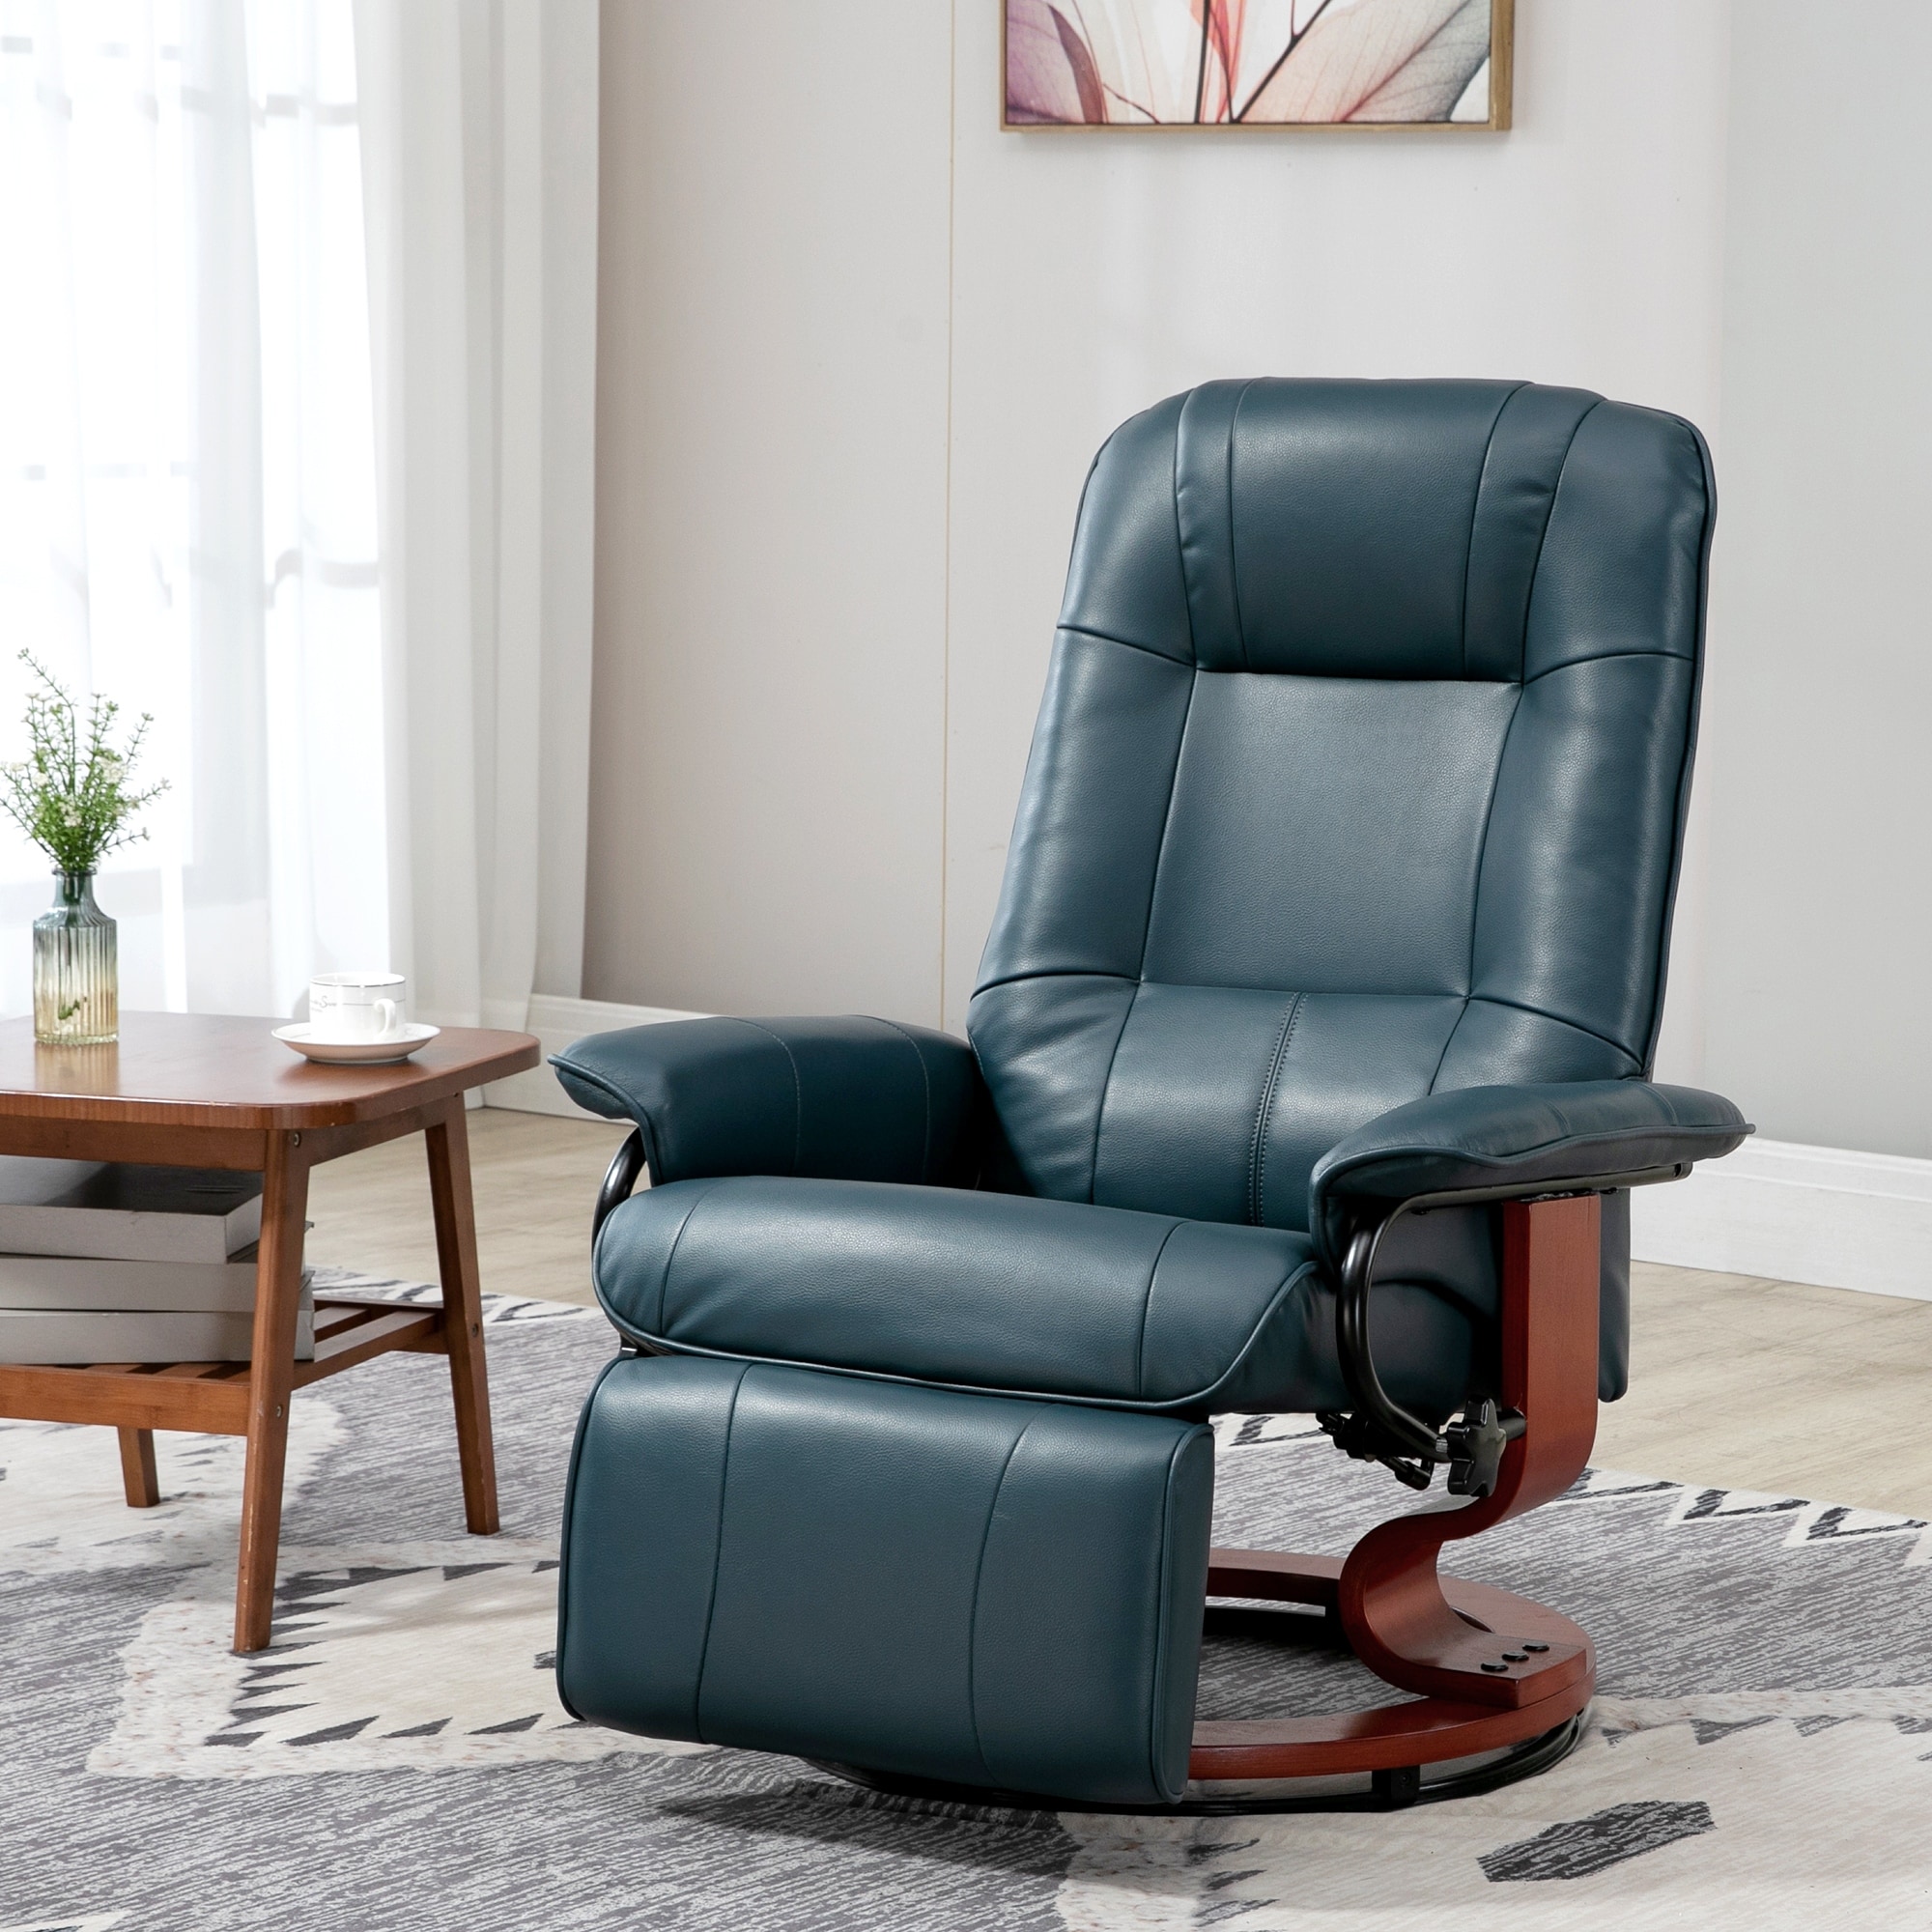 HOMCOM Brown Massage Recliner and Ottoman, PU Leisure Office Chair with 10 Vibration Points, Adjustable Backrest